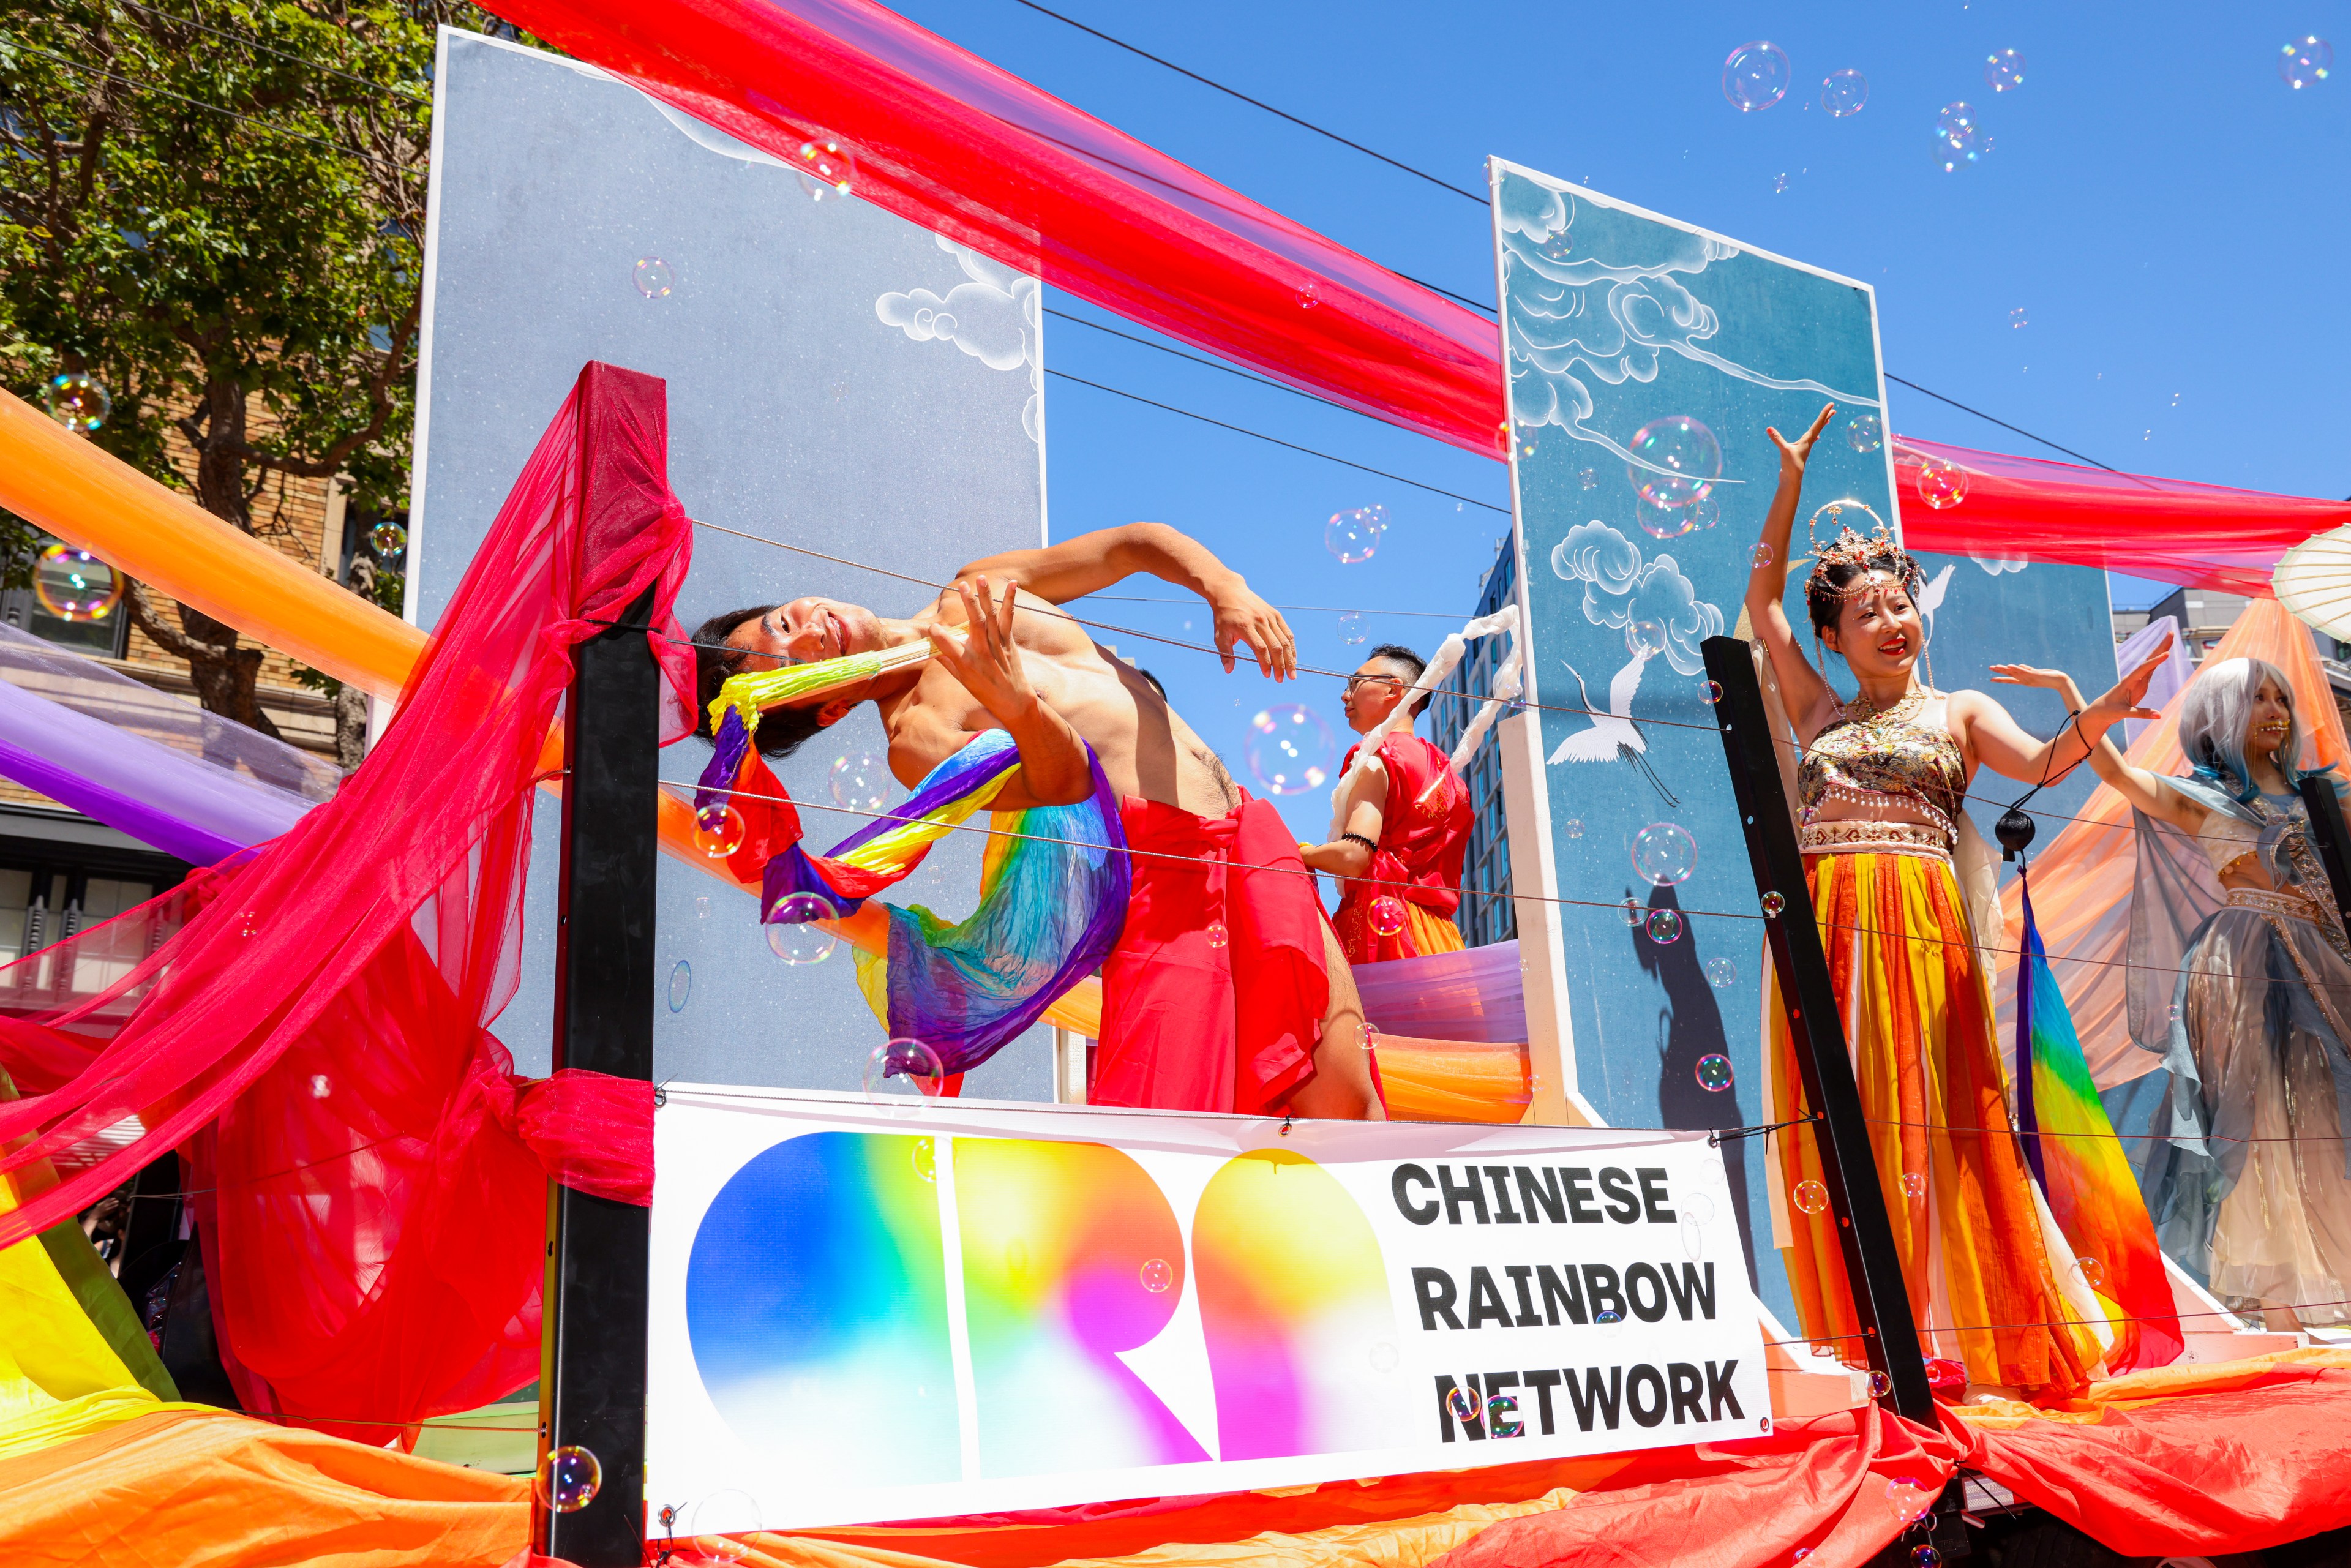 A colorful parade float features dancers in vibrant costumes and rainbow fabric under a clear sky. The sign reads &quot;CHINESE RAINBOW NETWORK&quot; amid floating bubbles.